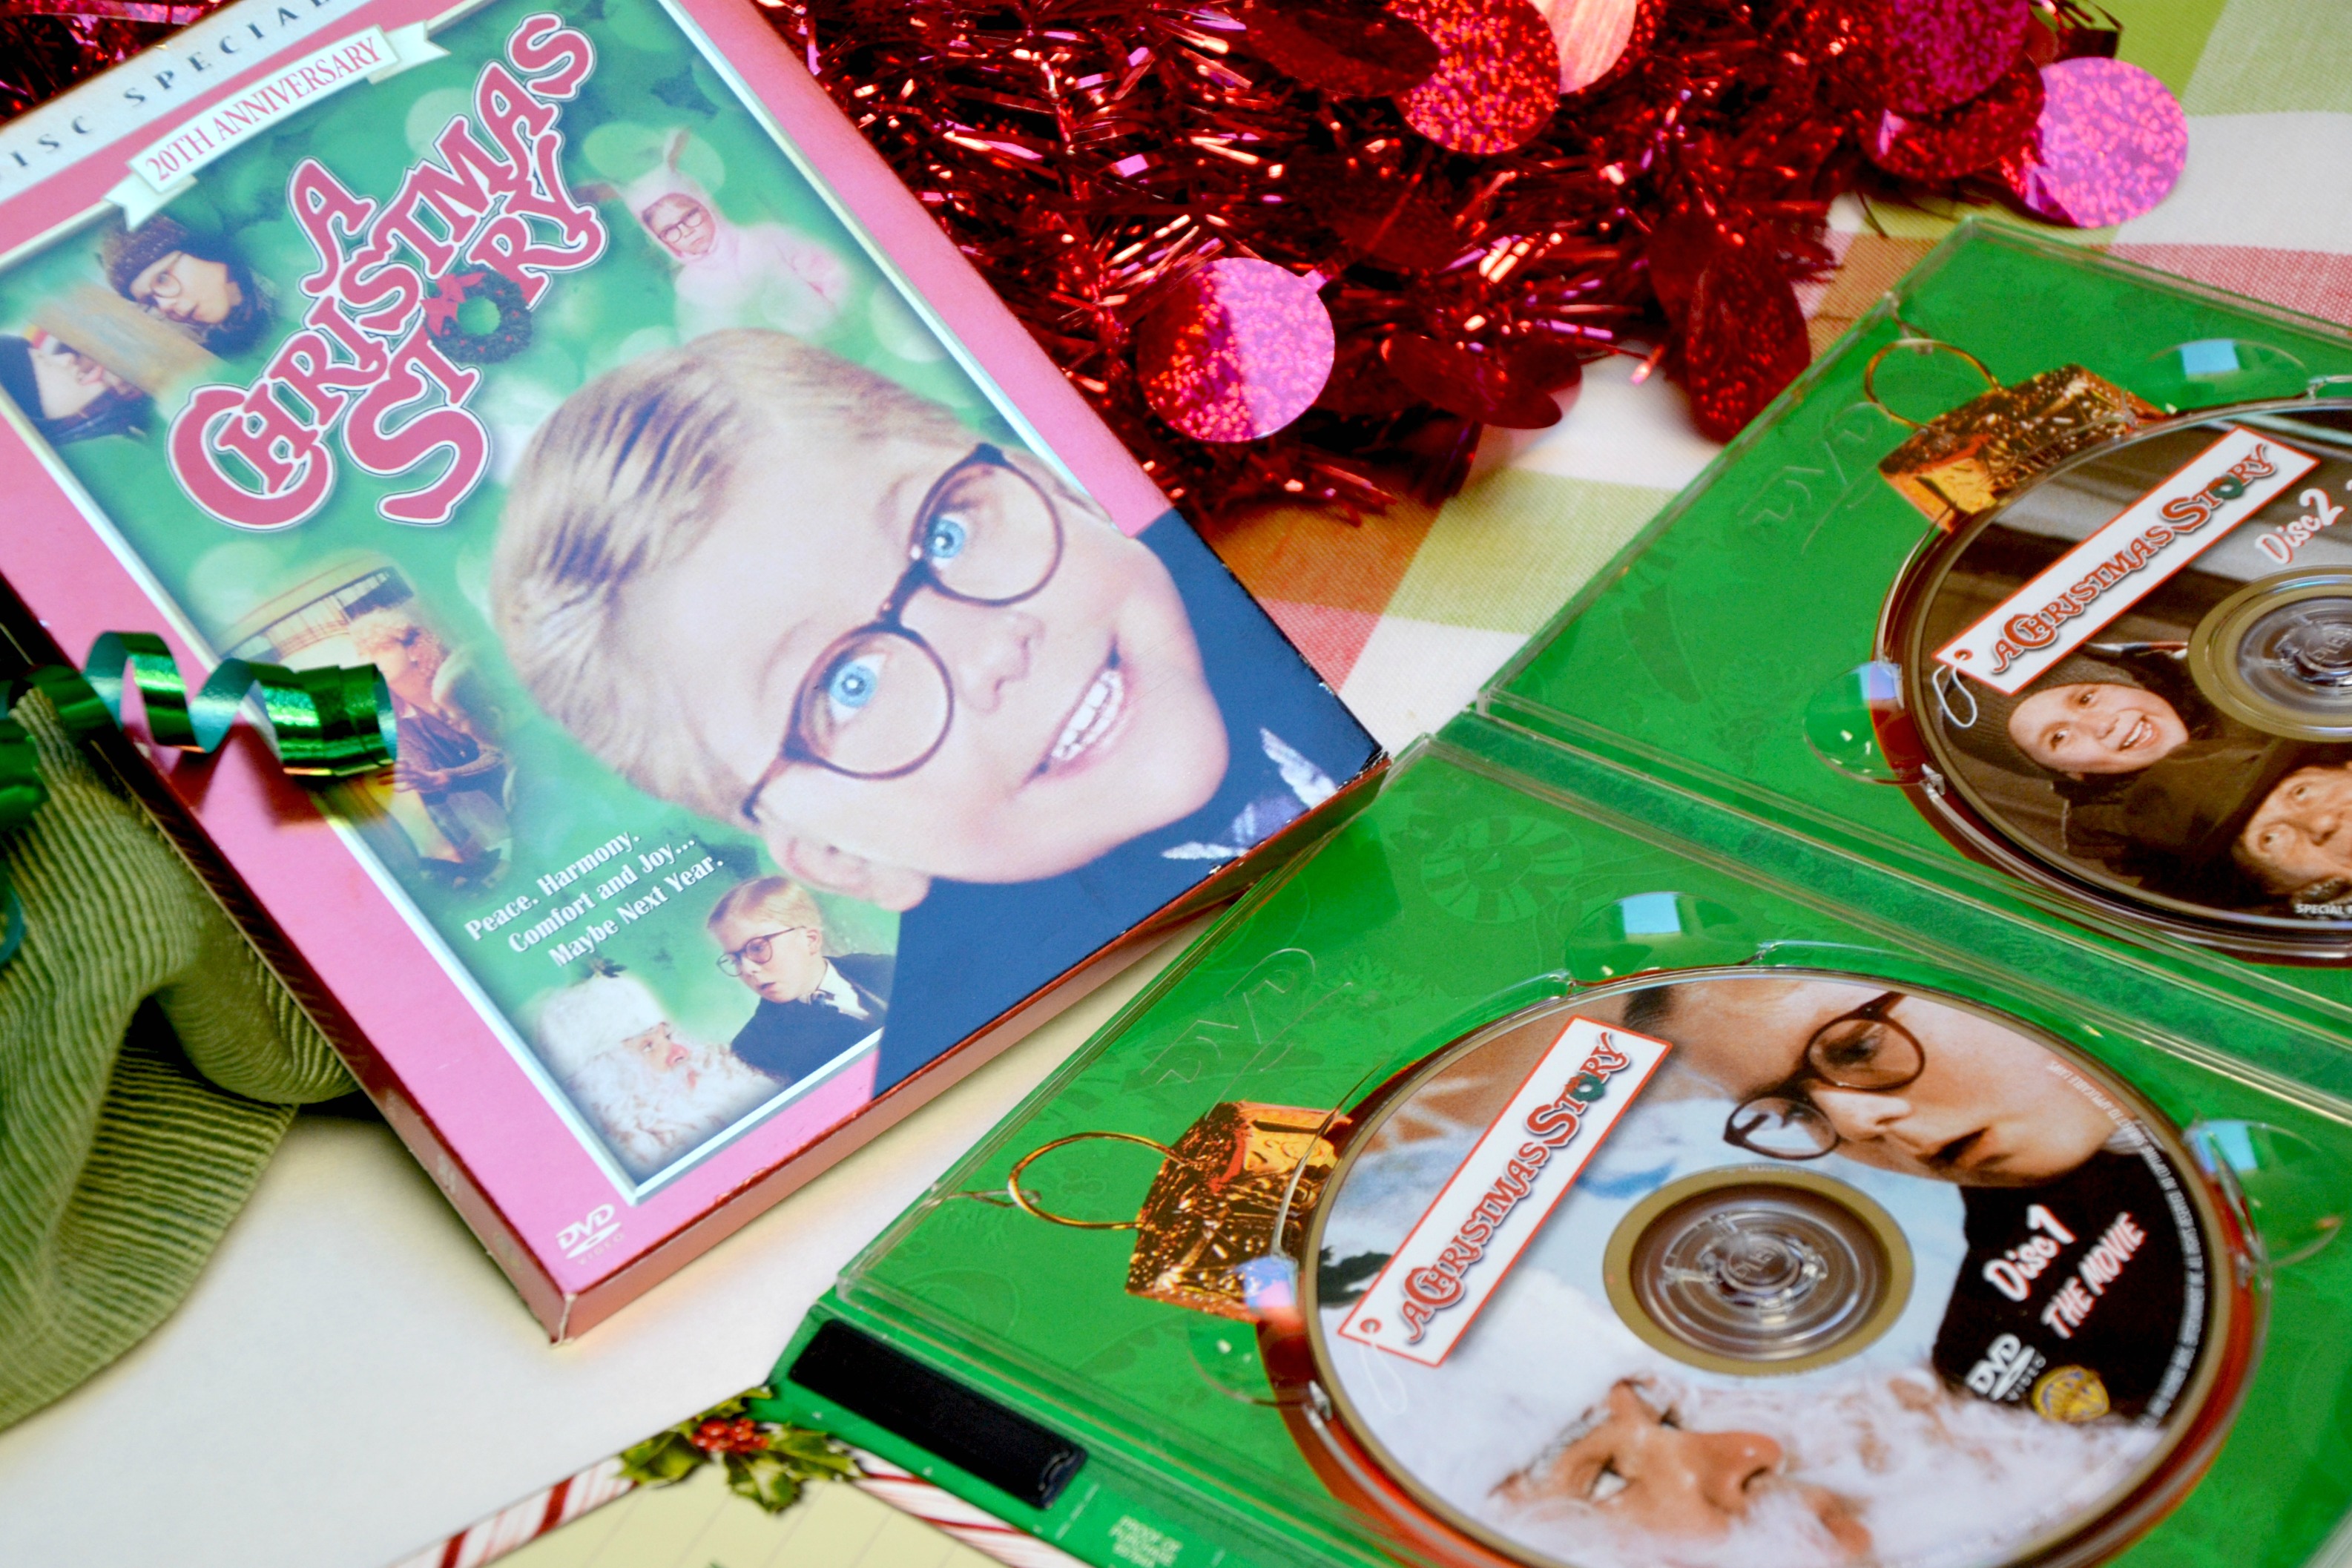 A Christmas Story fan holiday essentials movie